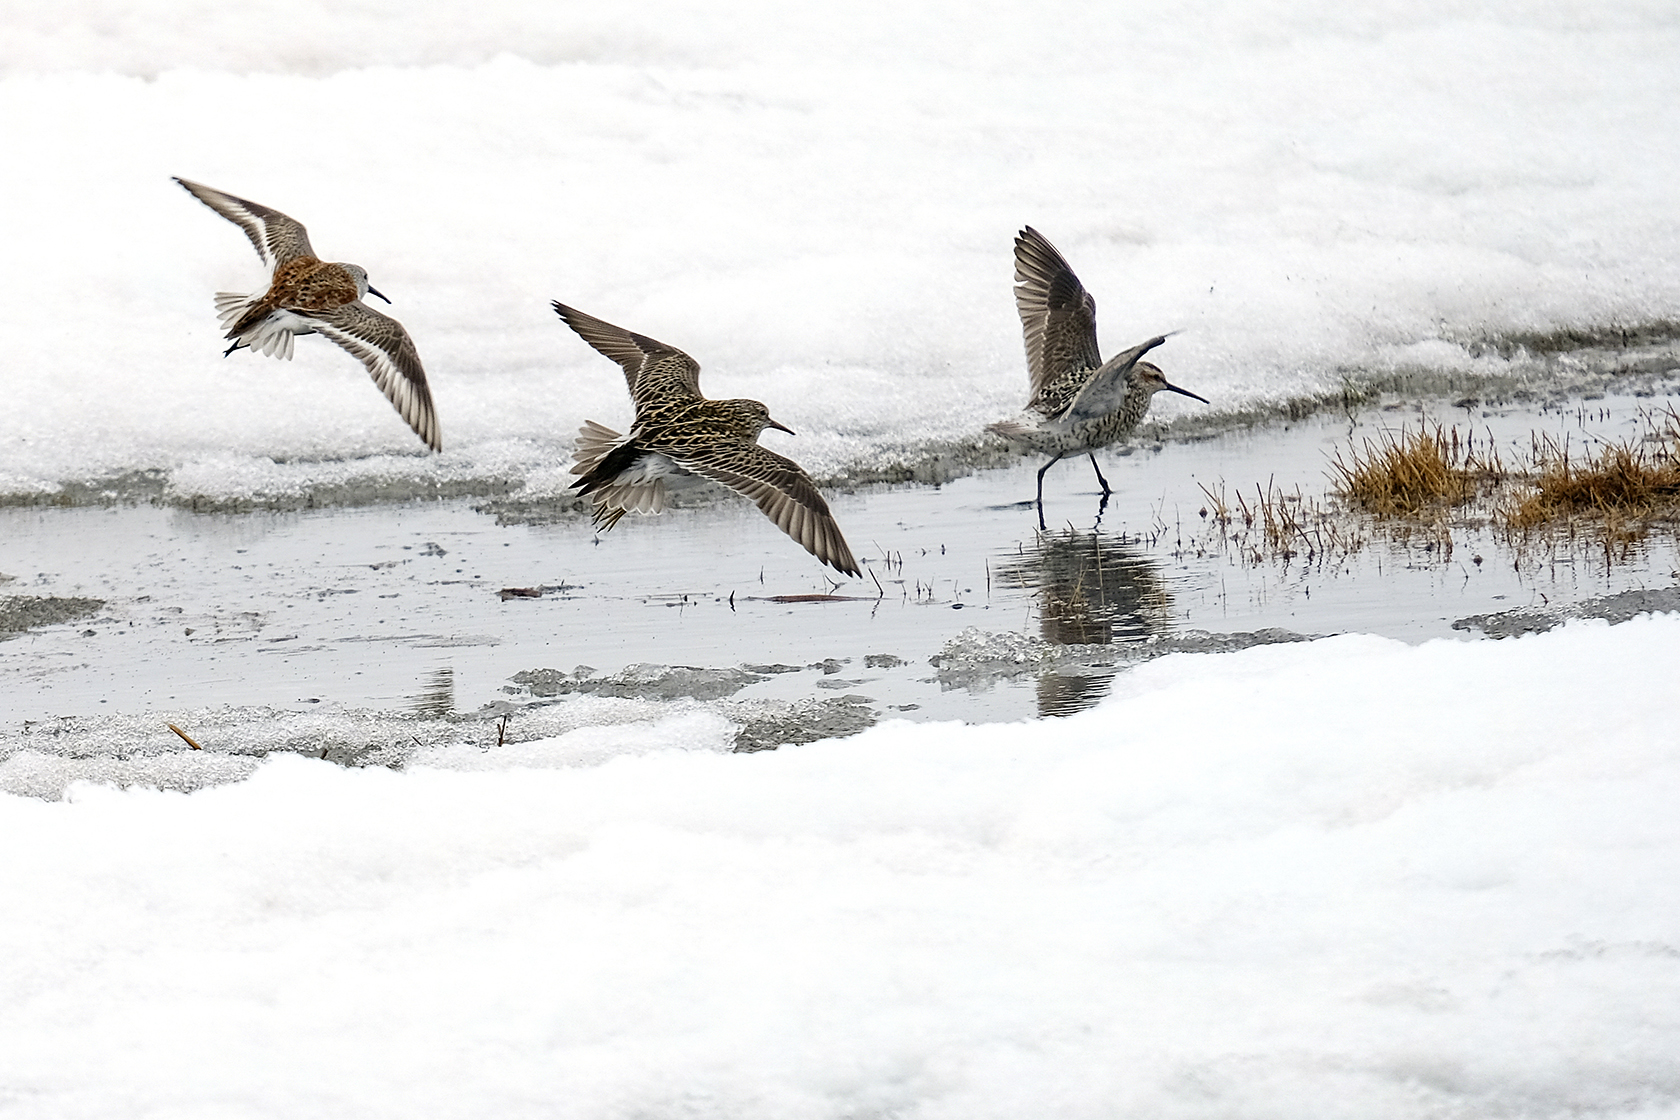 Four birds flying close to a snowy ground